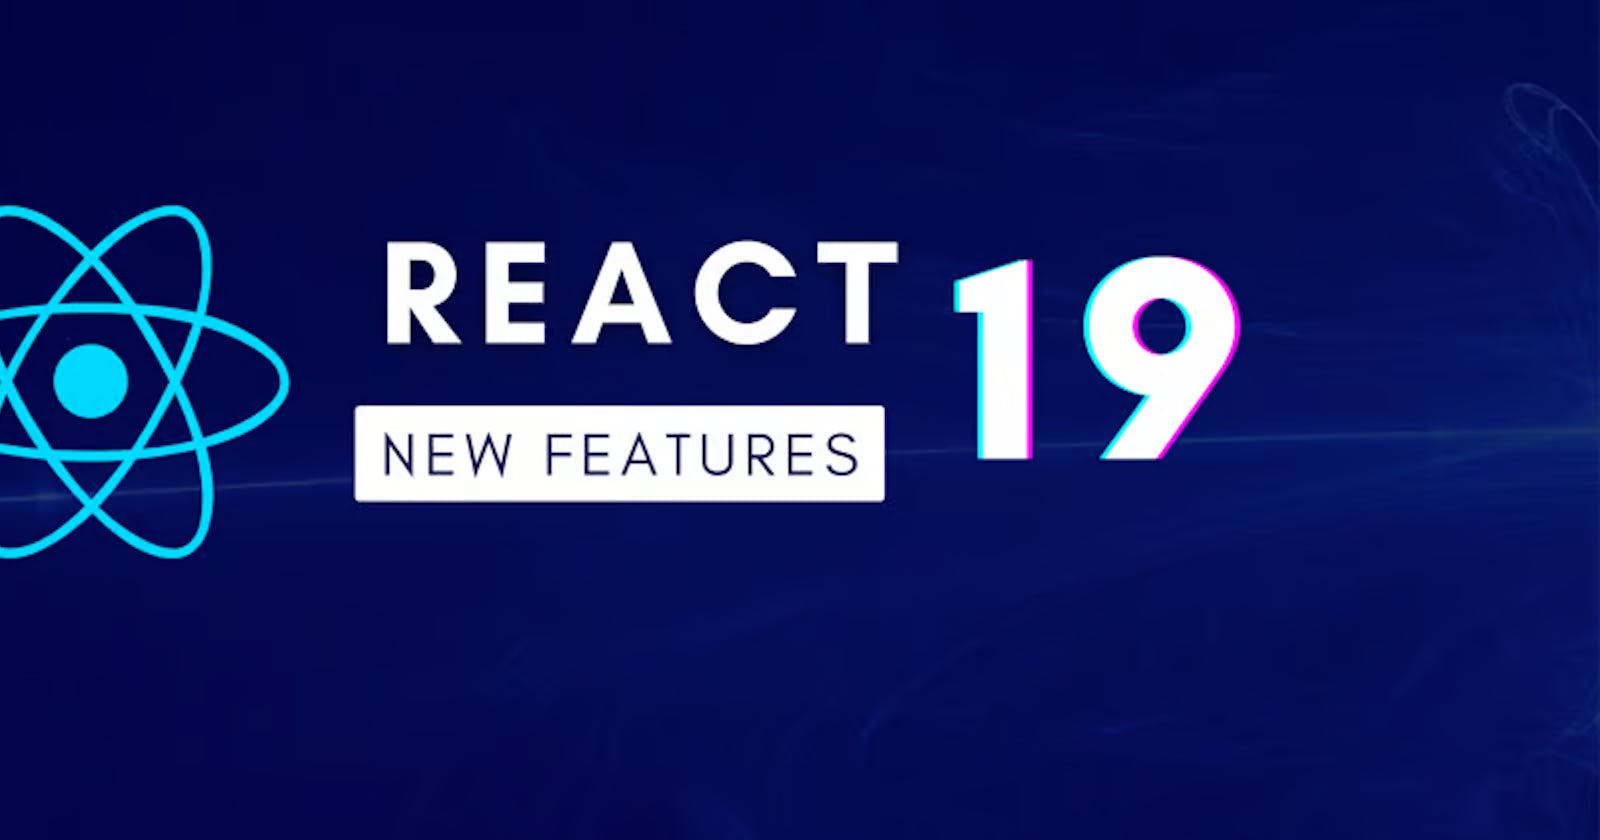 All you need to know about React19